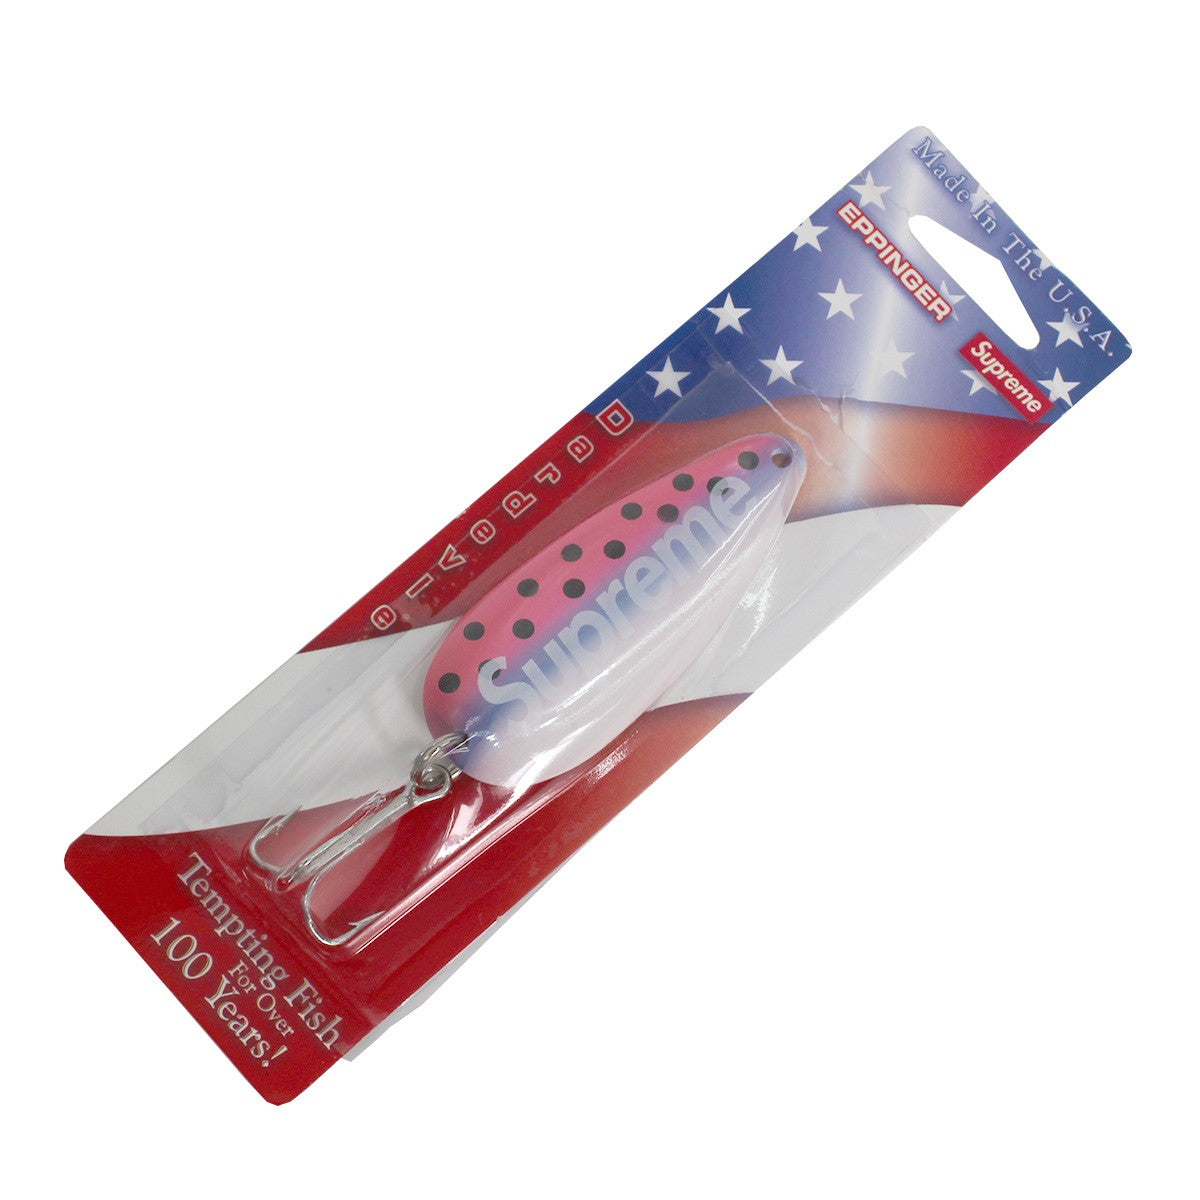 19SS Dardevle Lure Rainbow Trout ロゴルアー 【8月2日値下】